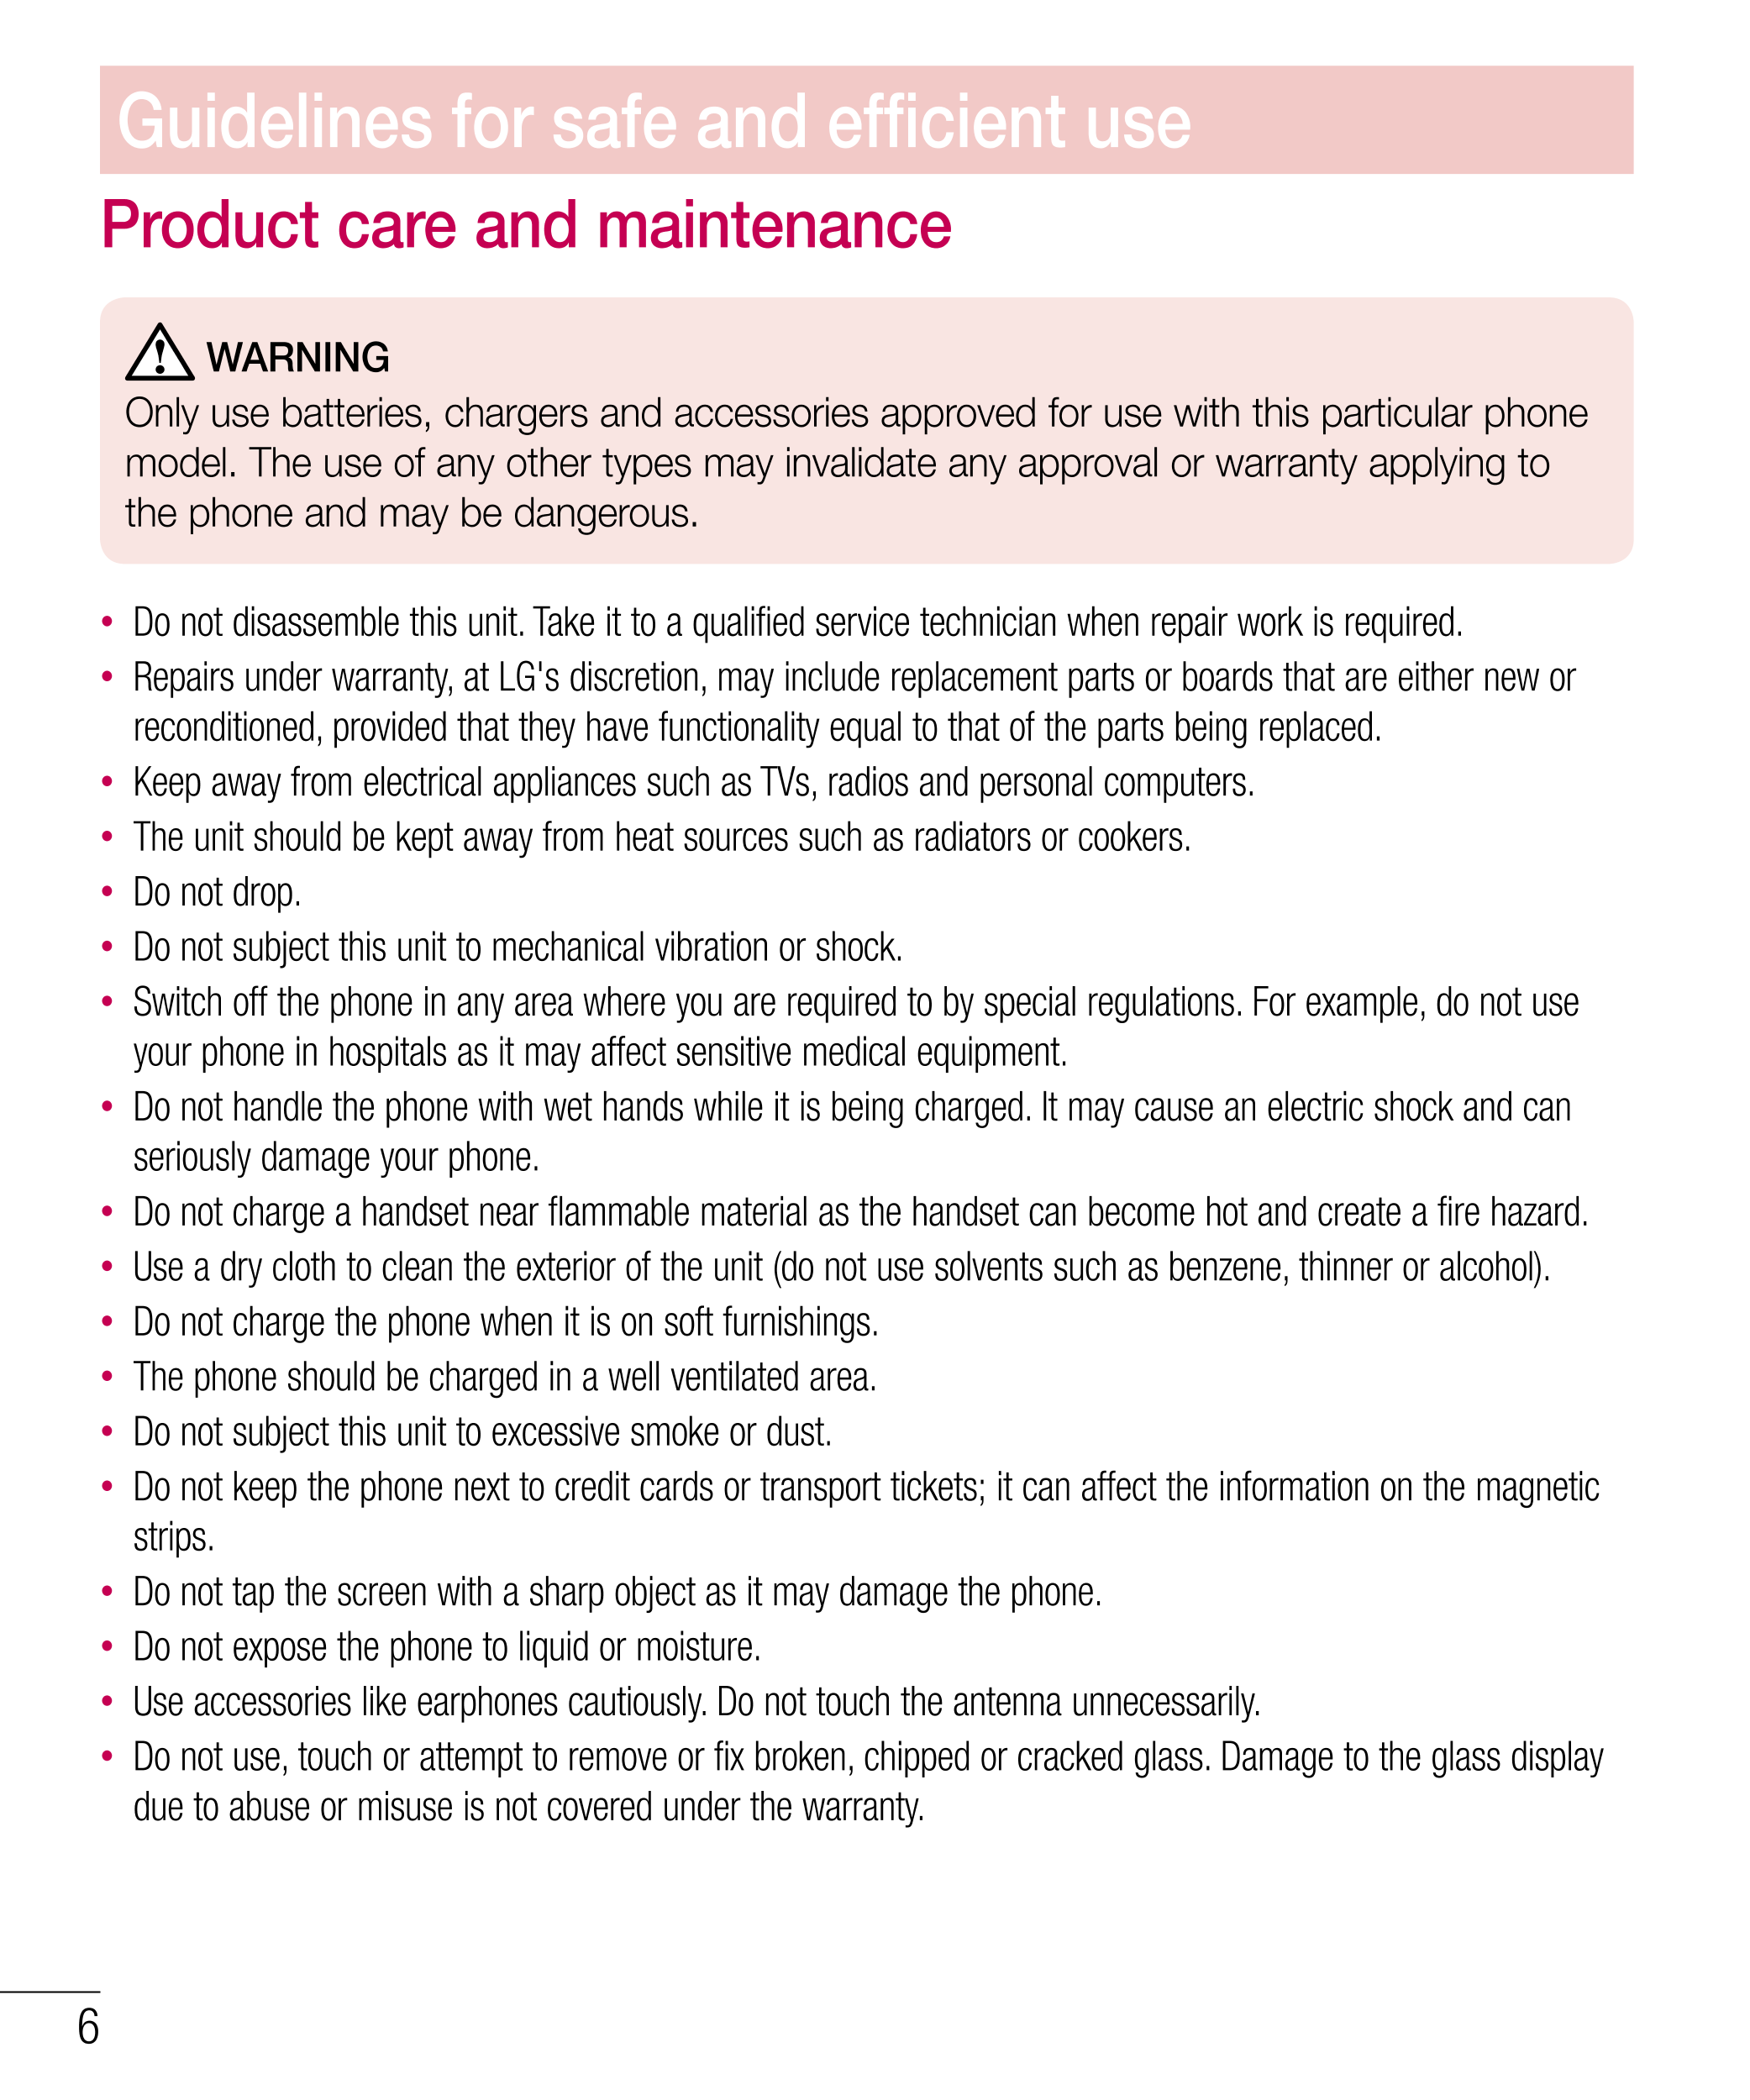 Guidelines for safe and efﬁcient use
Product care and maintenance
 WARNING
Only use batteries, chargers and accessories approved